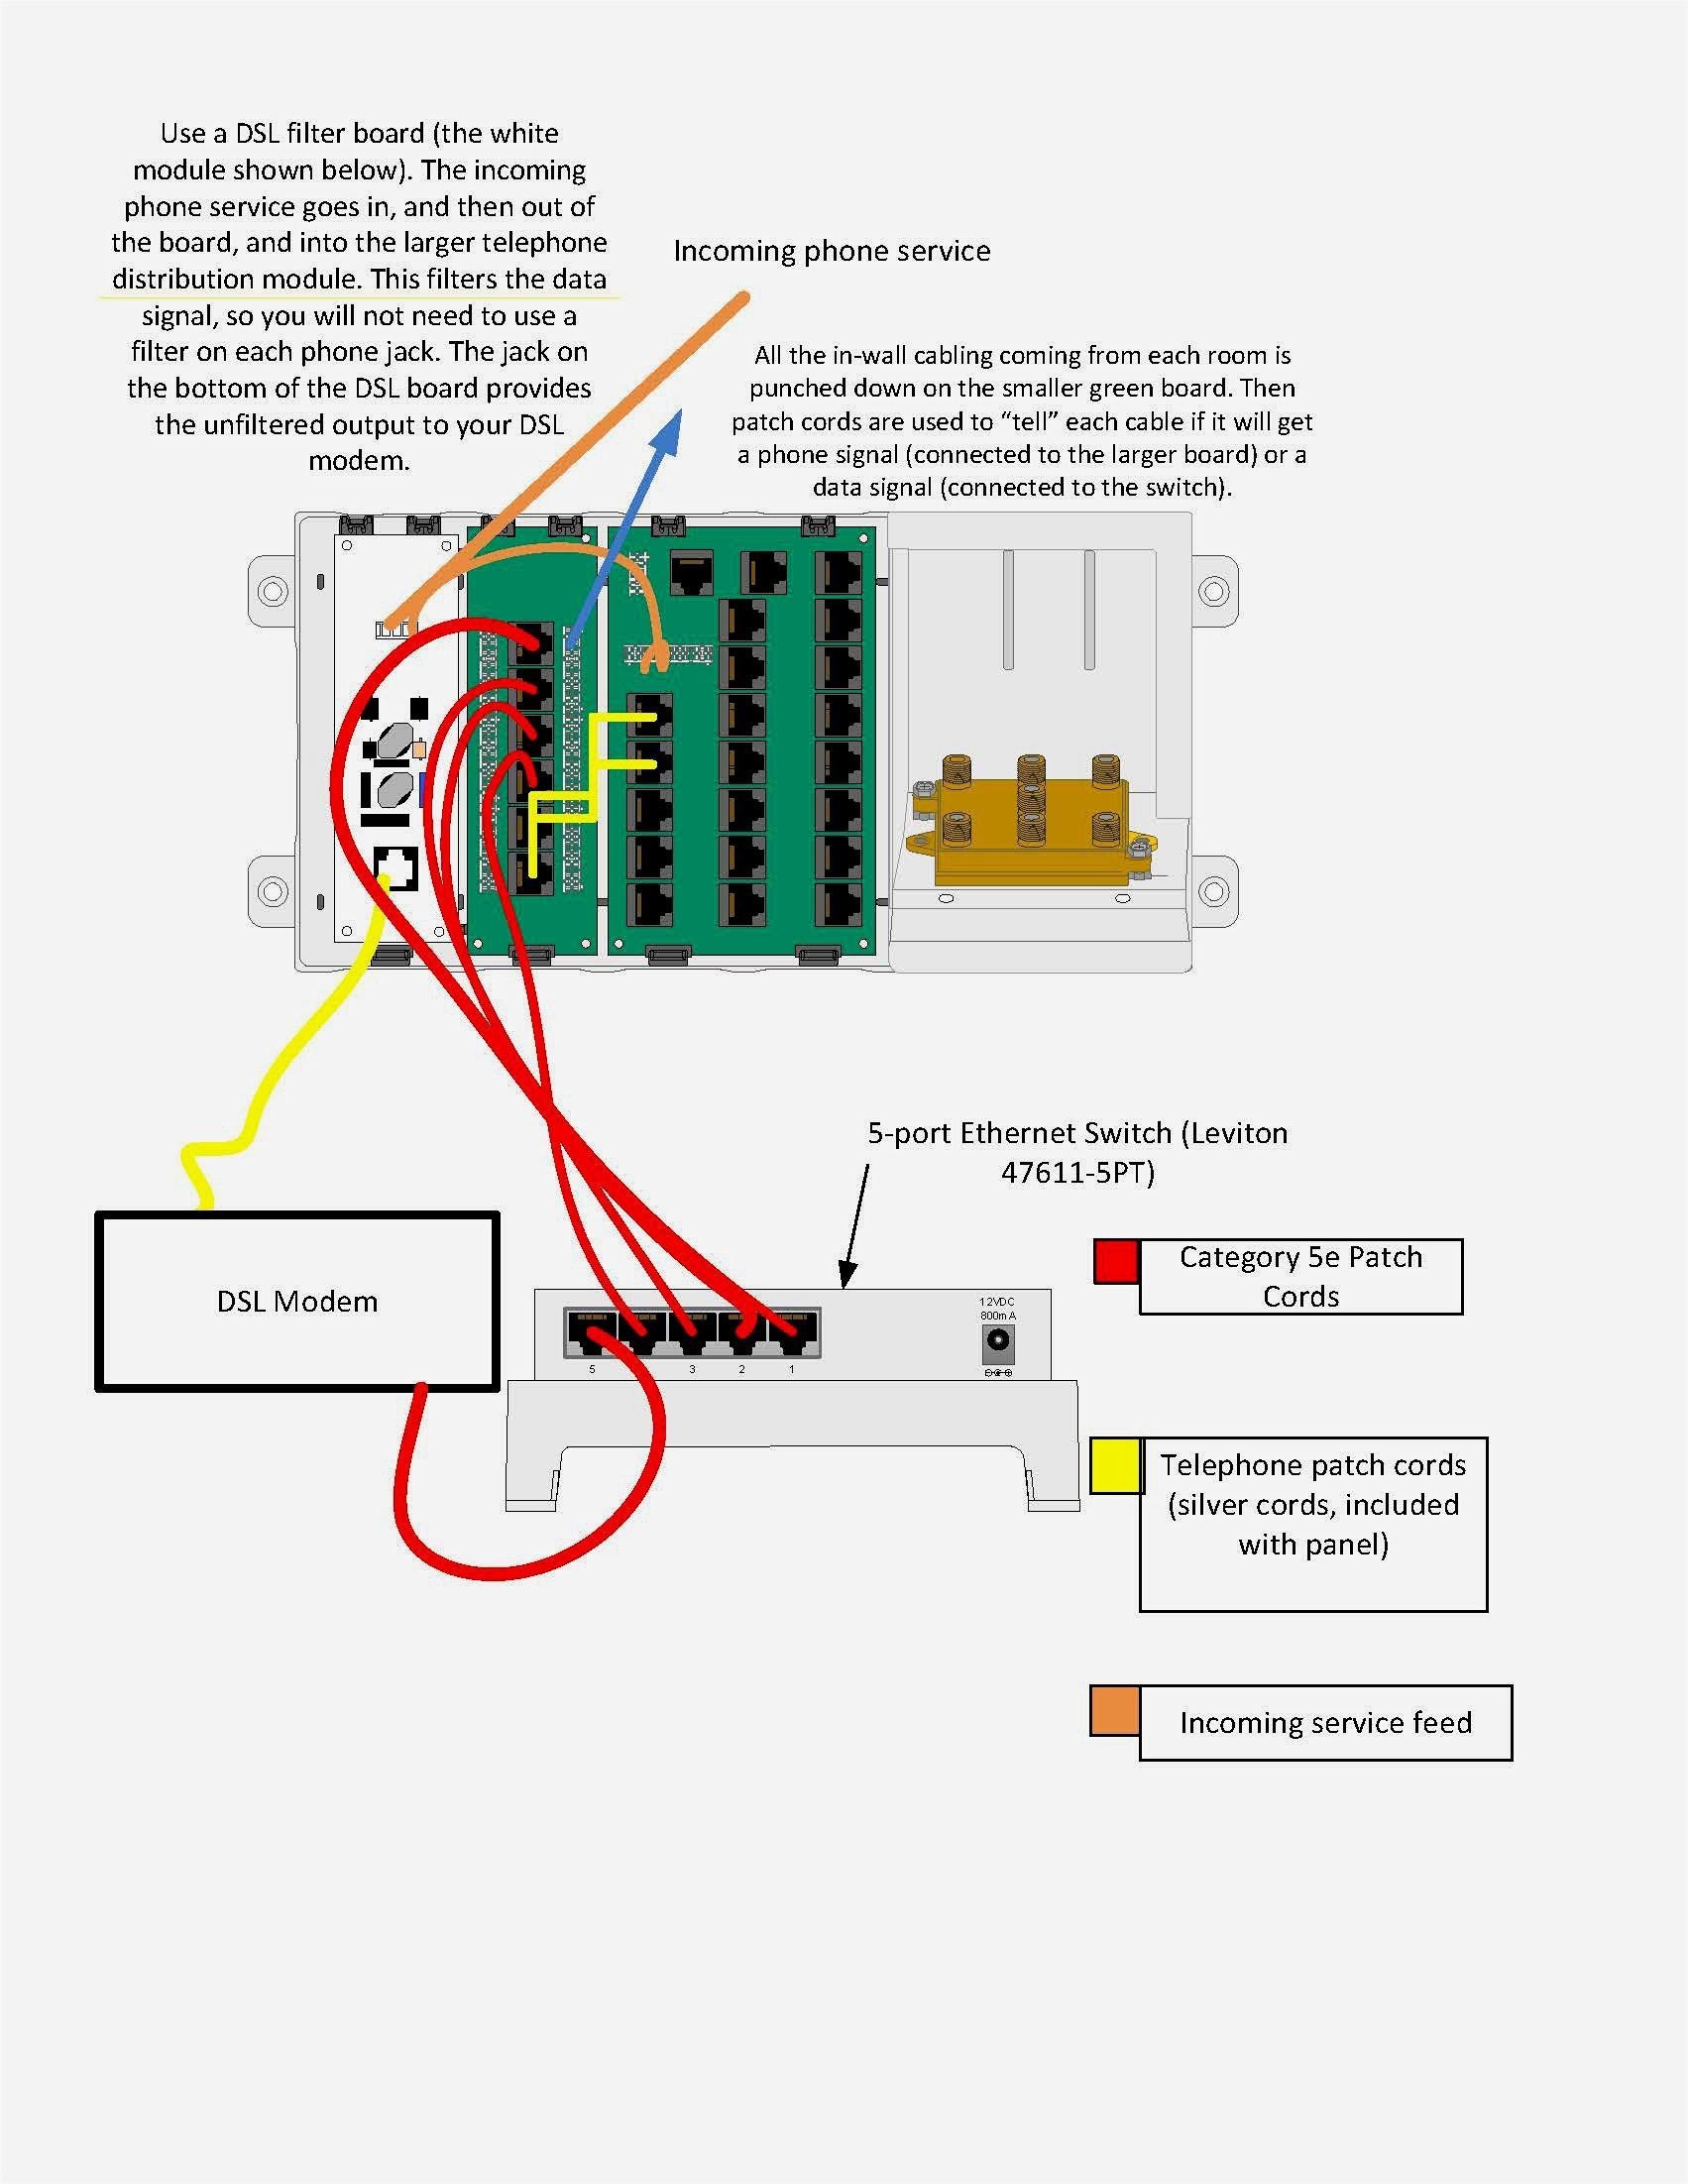 Wiring Diagram for Cat5 Patch Cable Save Cat 5e Wiring Diagram Luxury Cat5e Ethernet Wiring Diagram